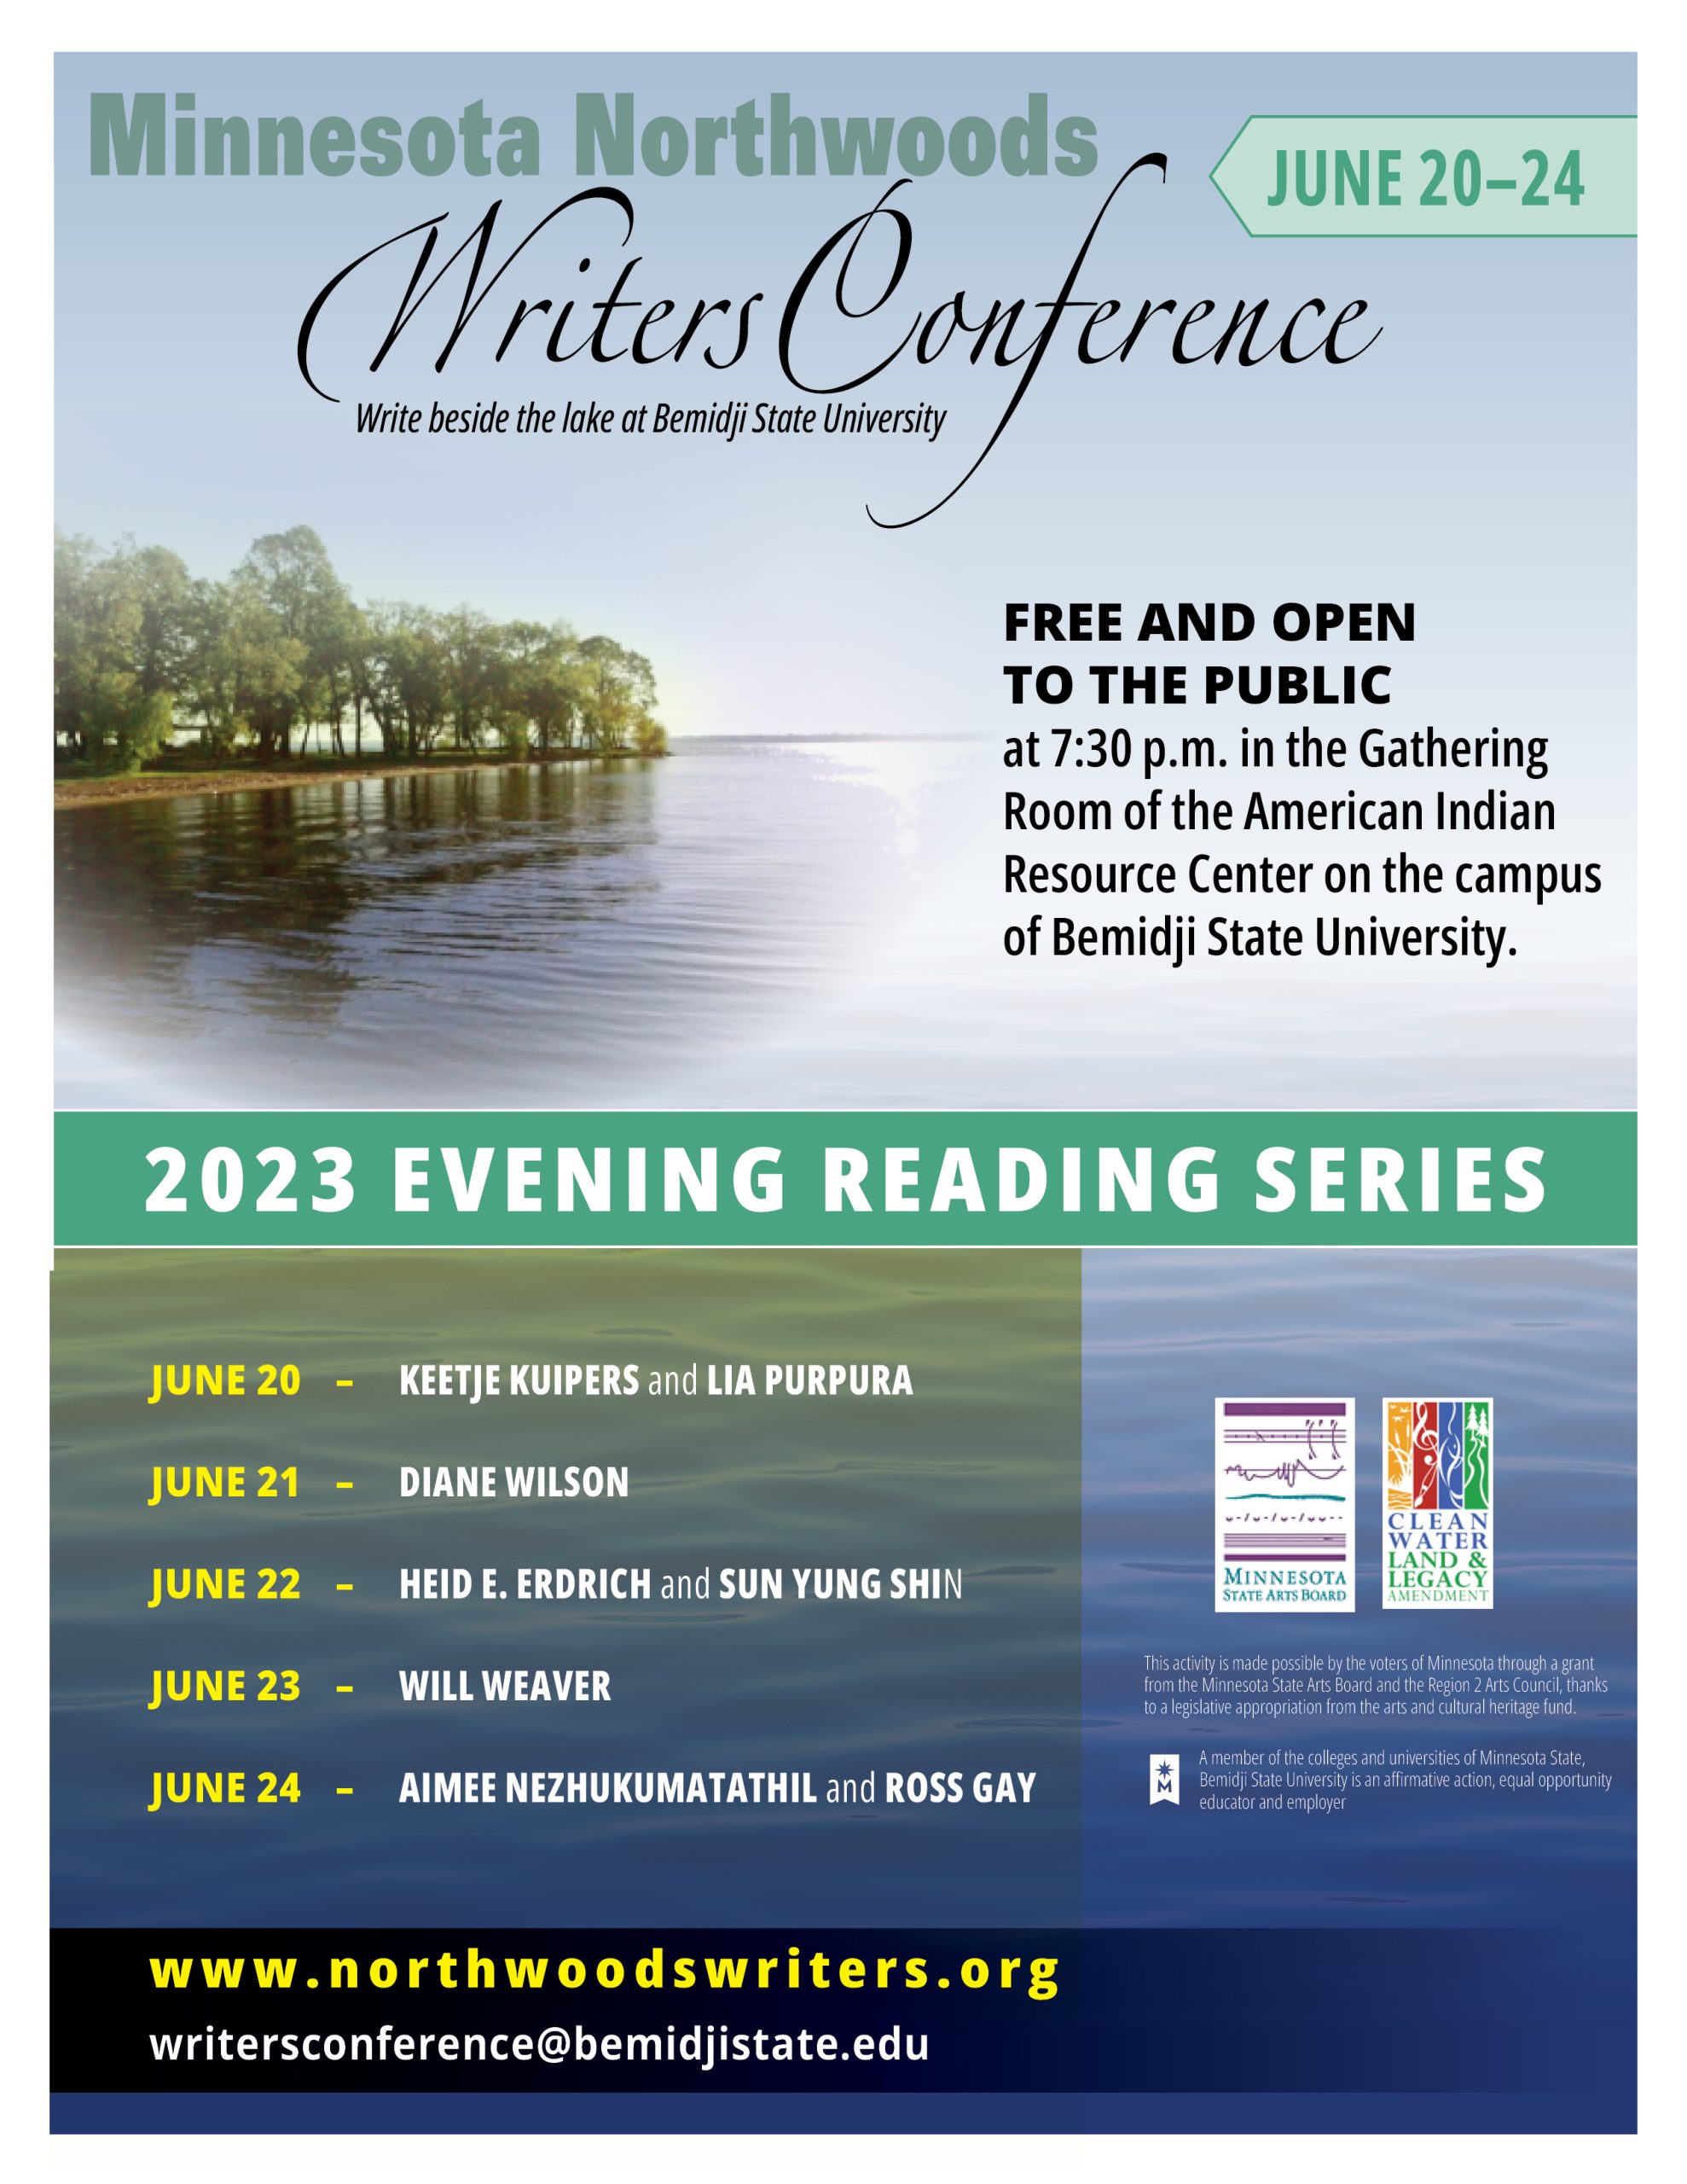 Poster for the Northwoods Writers Conference